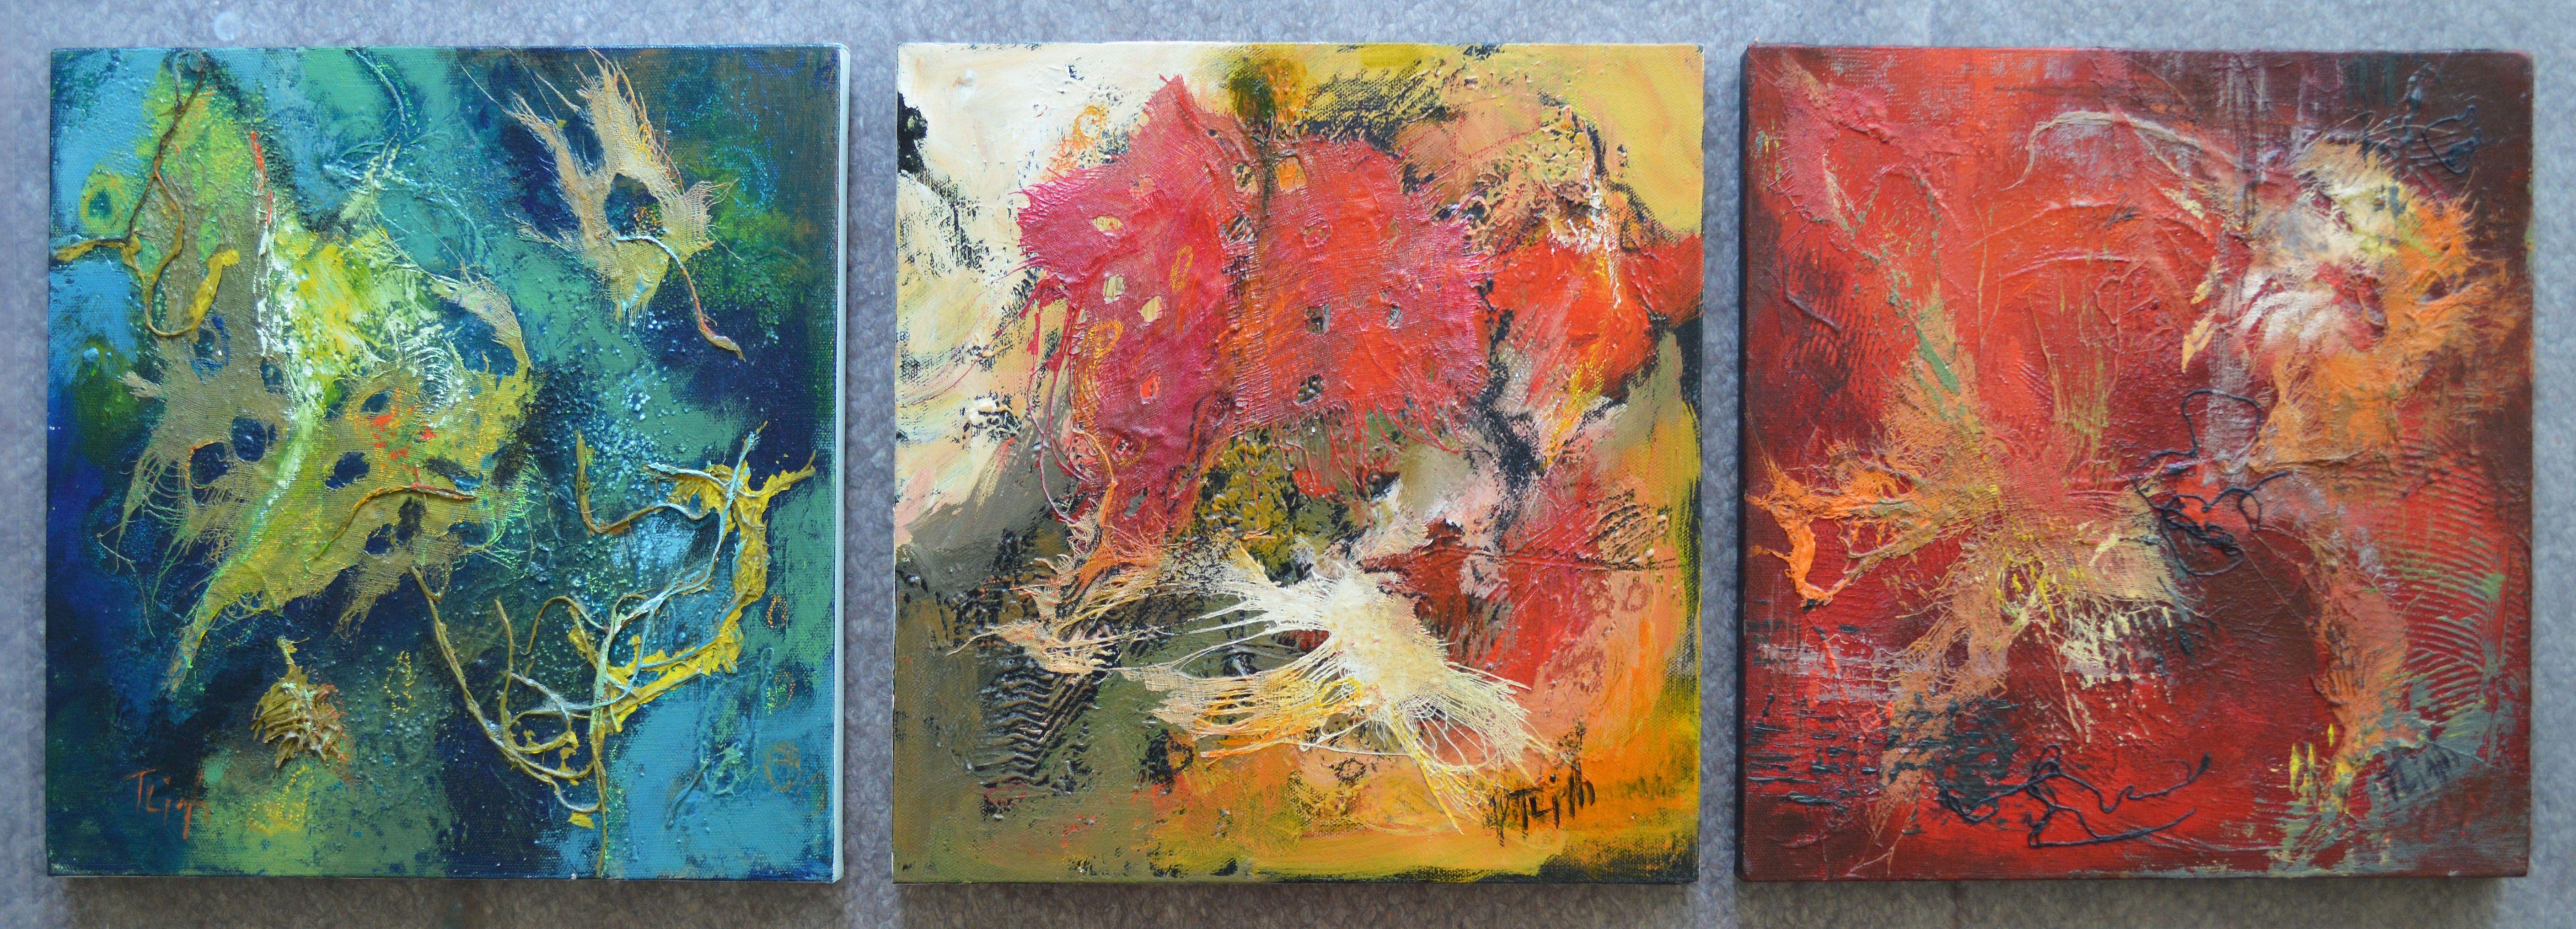 Maples on the Rocks, Painting, Acrylic on Wood Panel For Sale 3